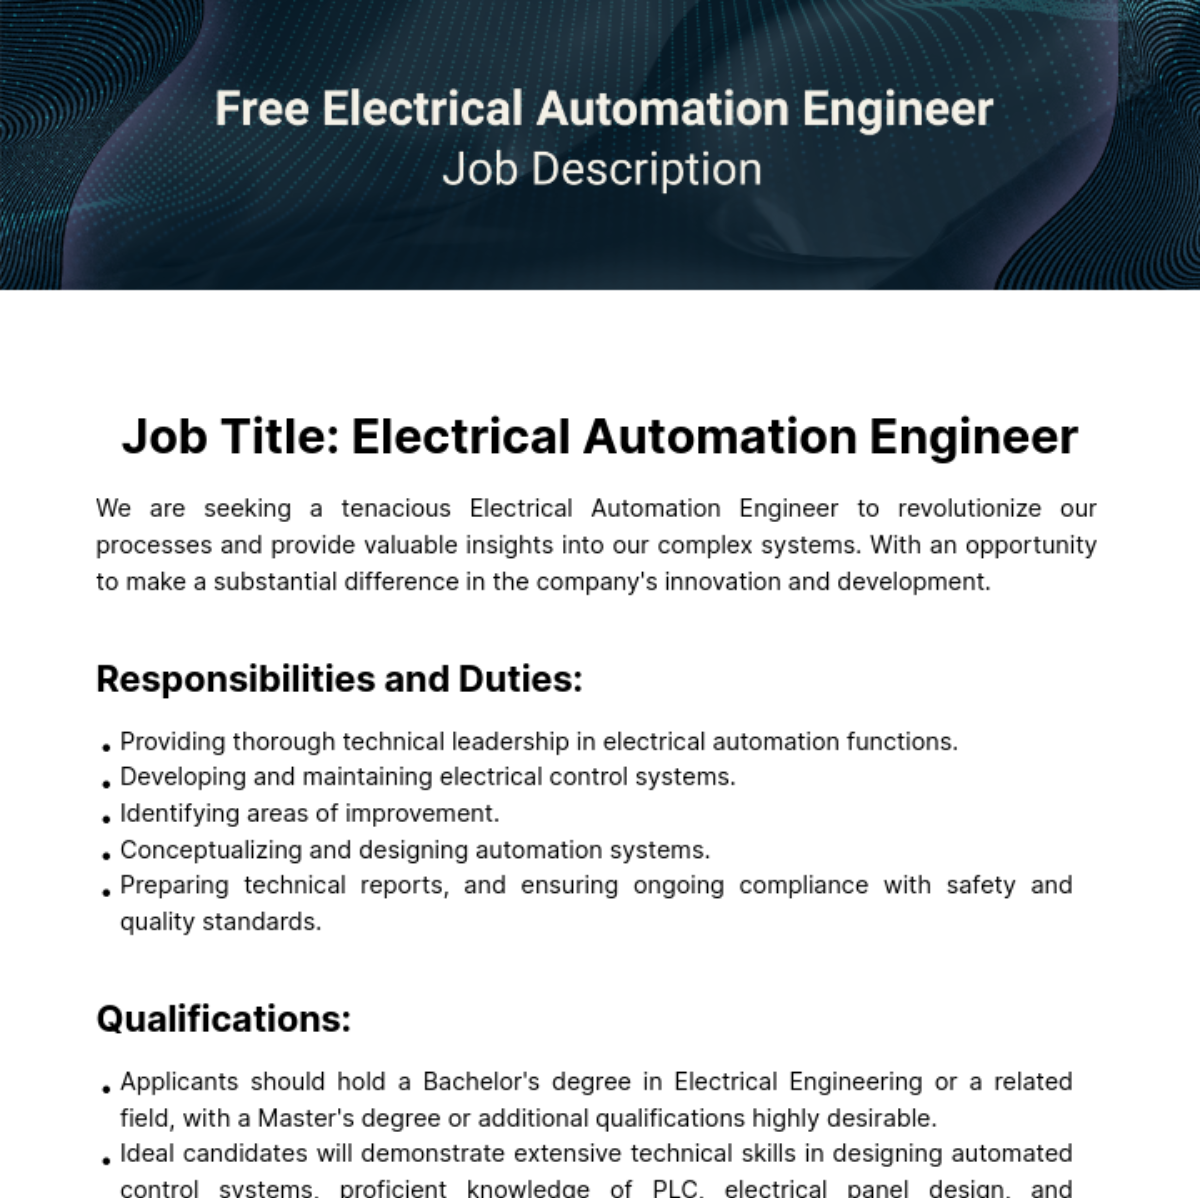 Free Electrical Automation Engineer Job Description Template